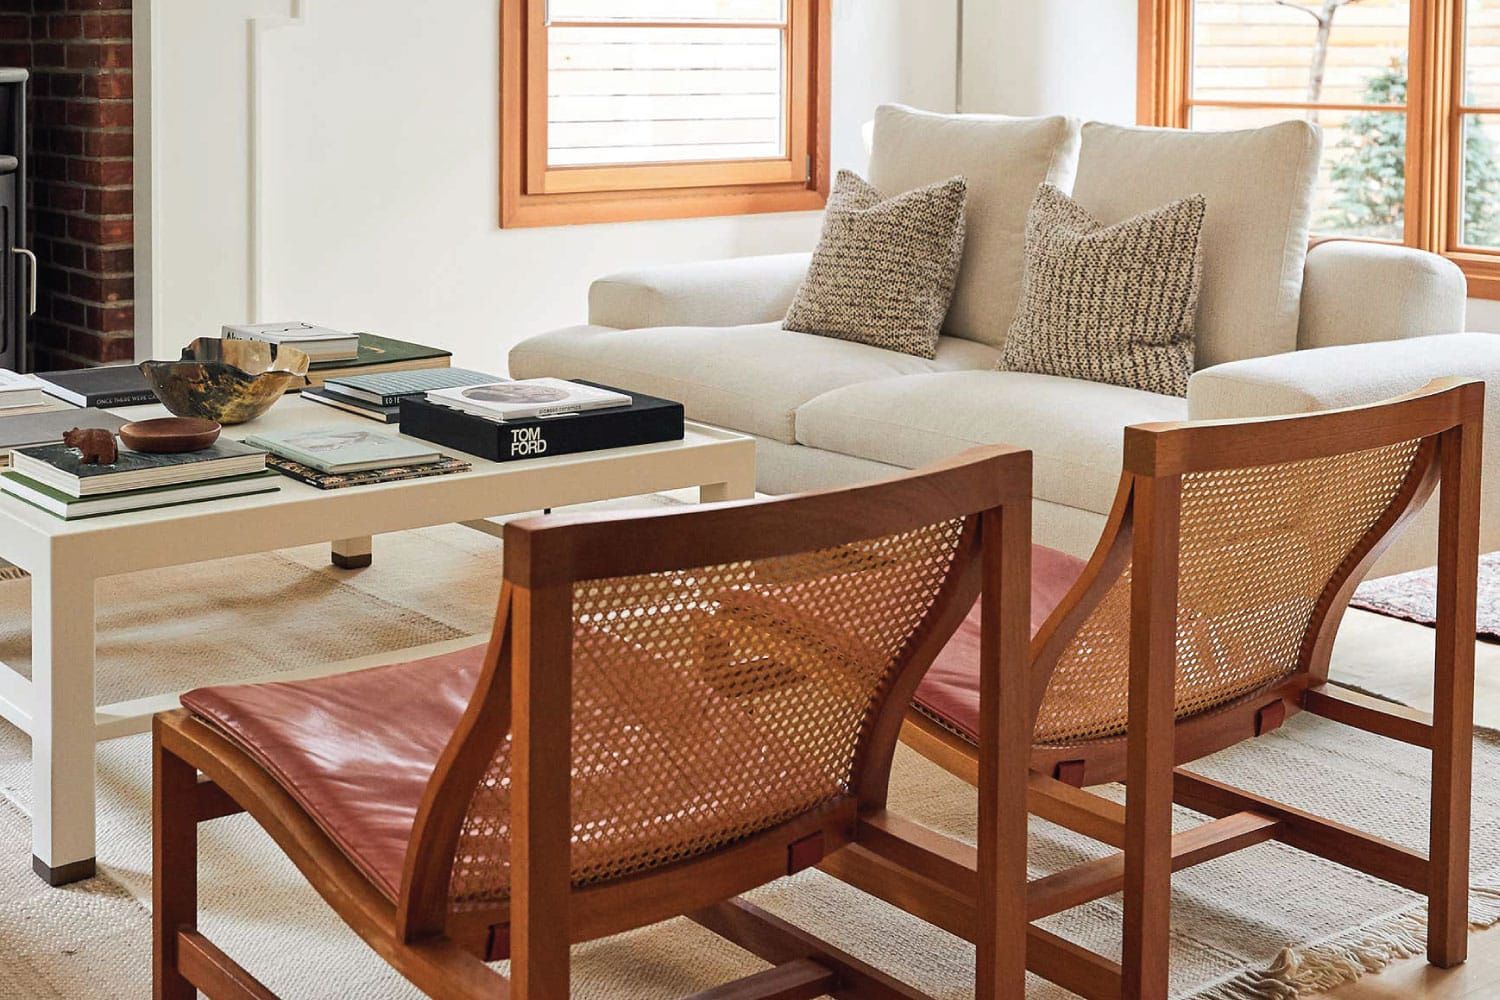 52 Types of Chairs to Know When Decorating Your Home